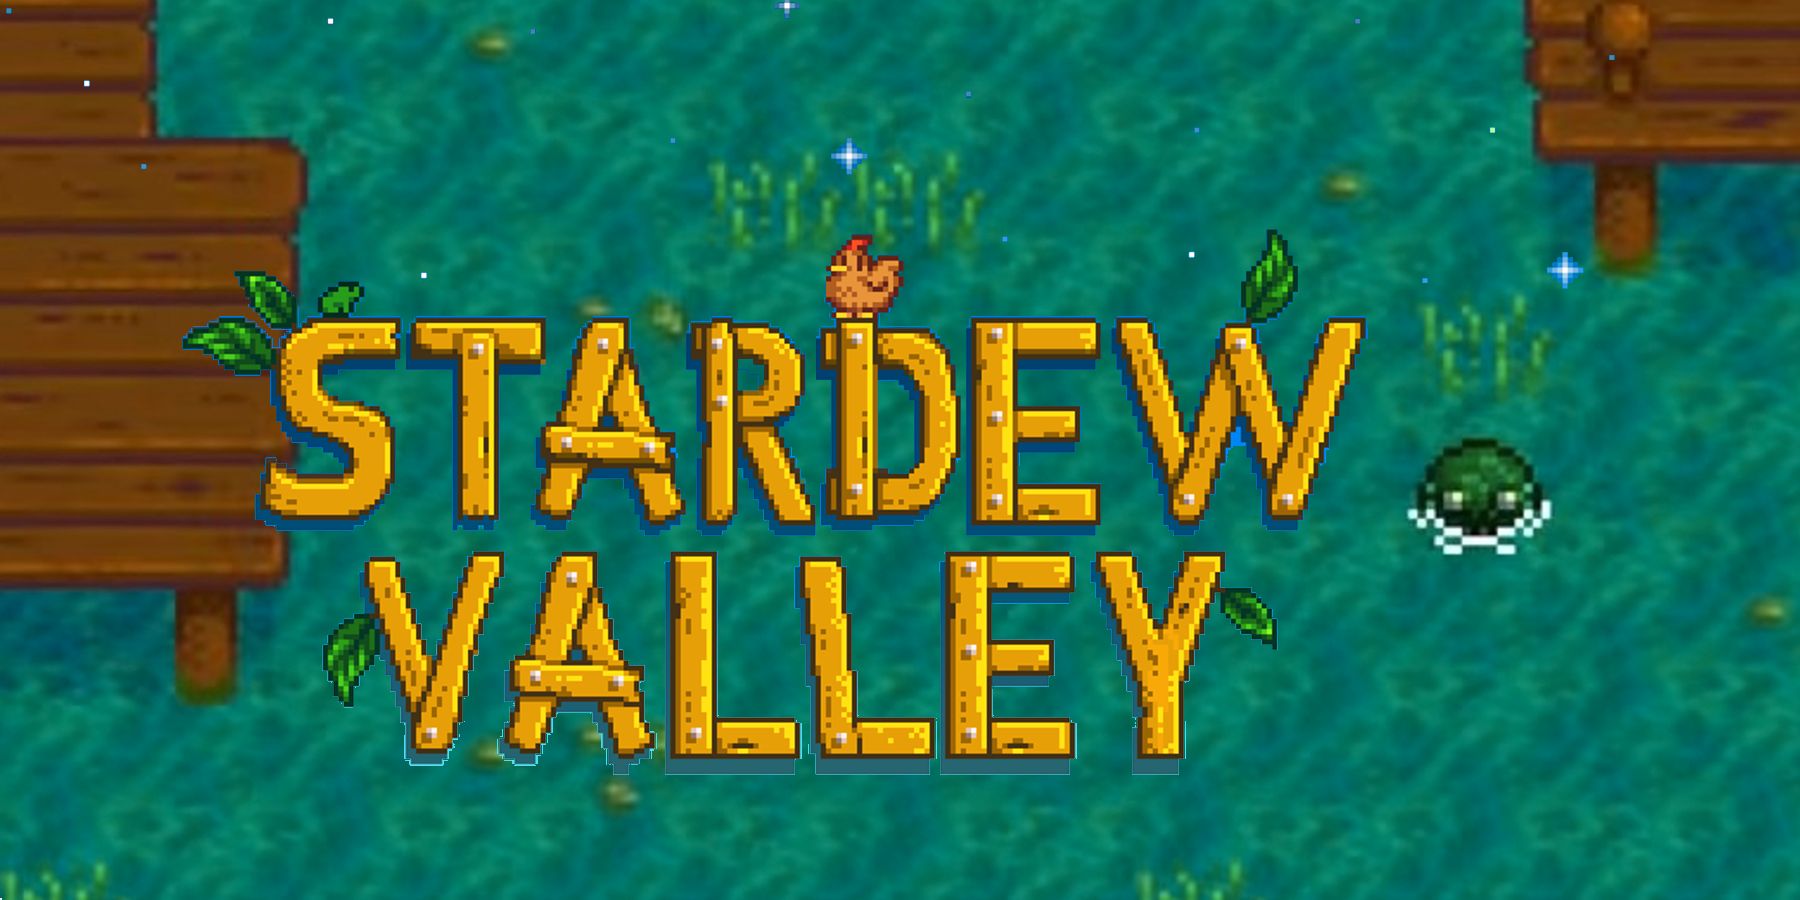 Stardew Valley’s Sea Monsterは説明しました